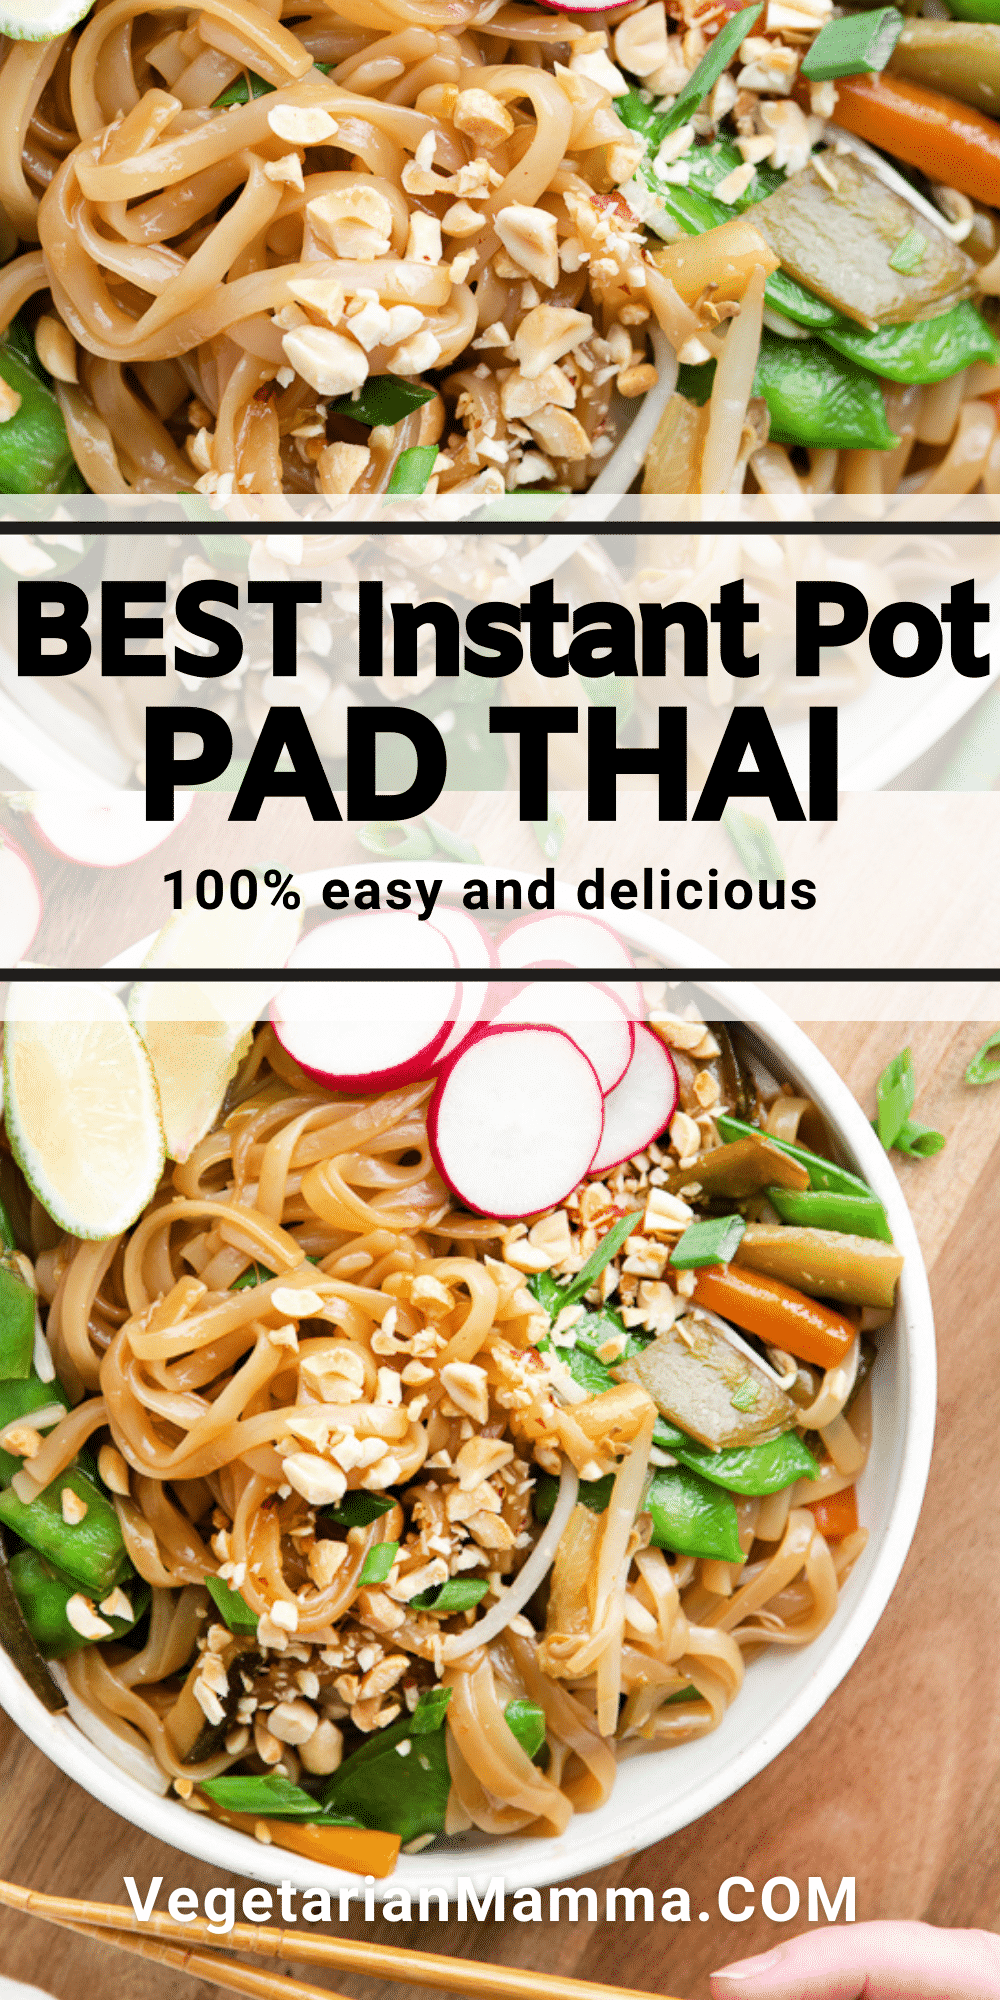 Make this wonderfully seasoned Pad Thai dish, packed with vegetables and noodles, in the Instant Pot for a simple, fast, homemade meal that's better than takeout. #instantpot #padthai